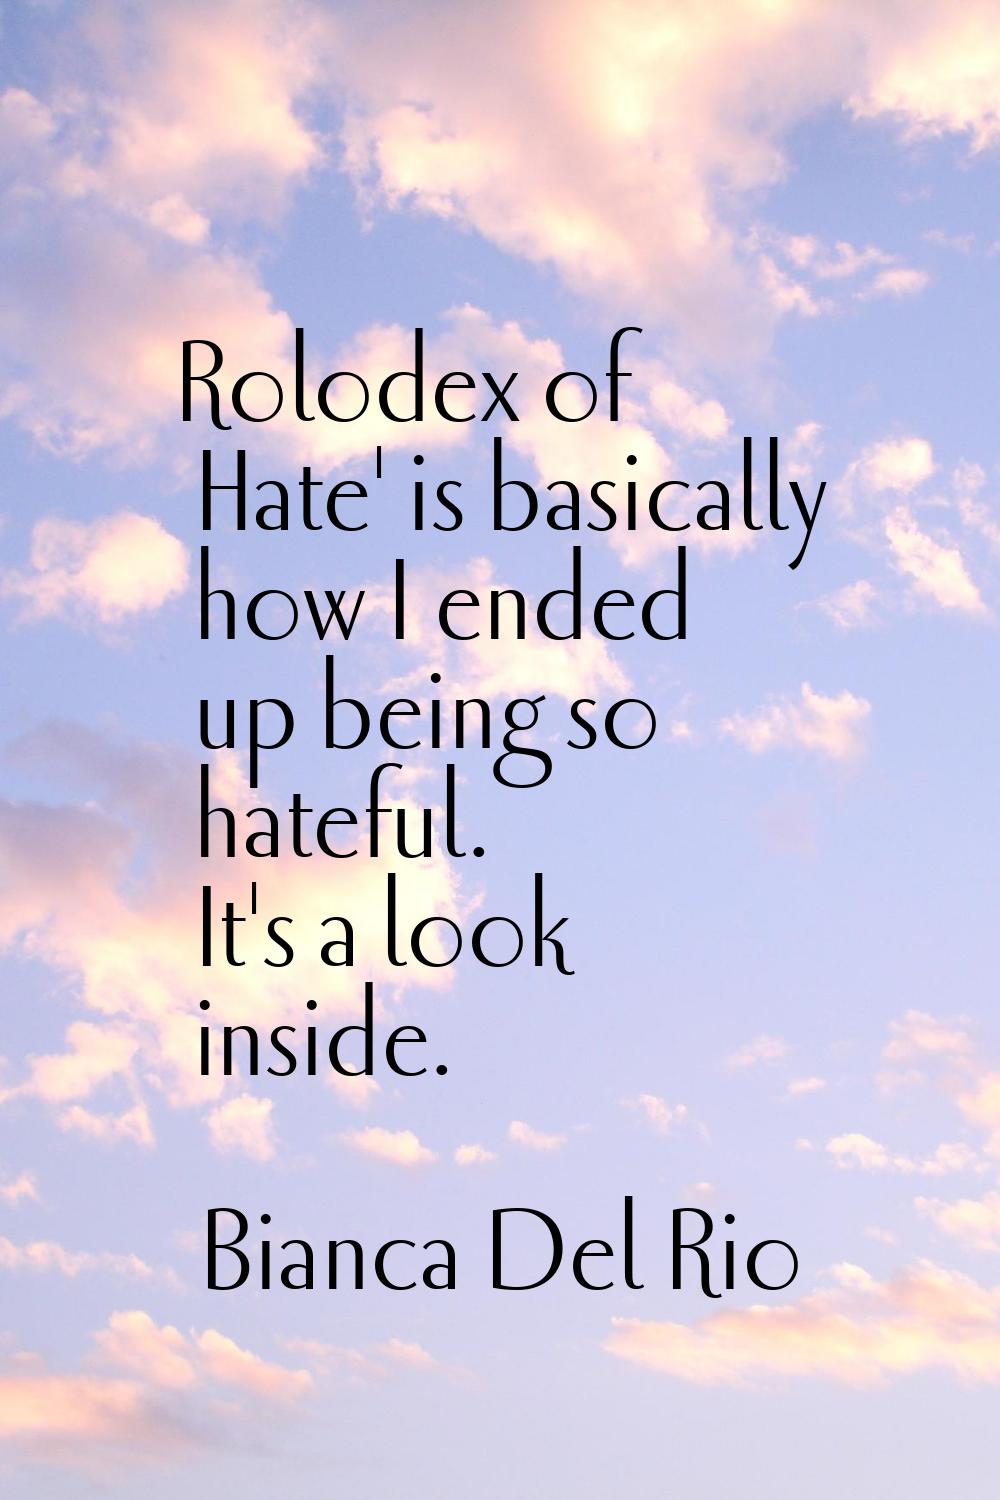 Rolodex of Hate' is basically how I ended up being so hateful. It's a look inside.